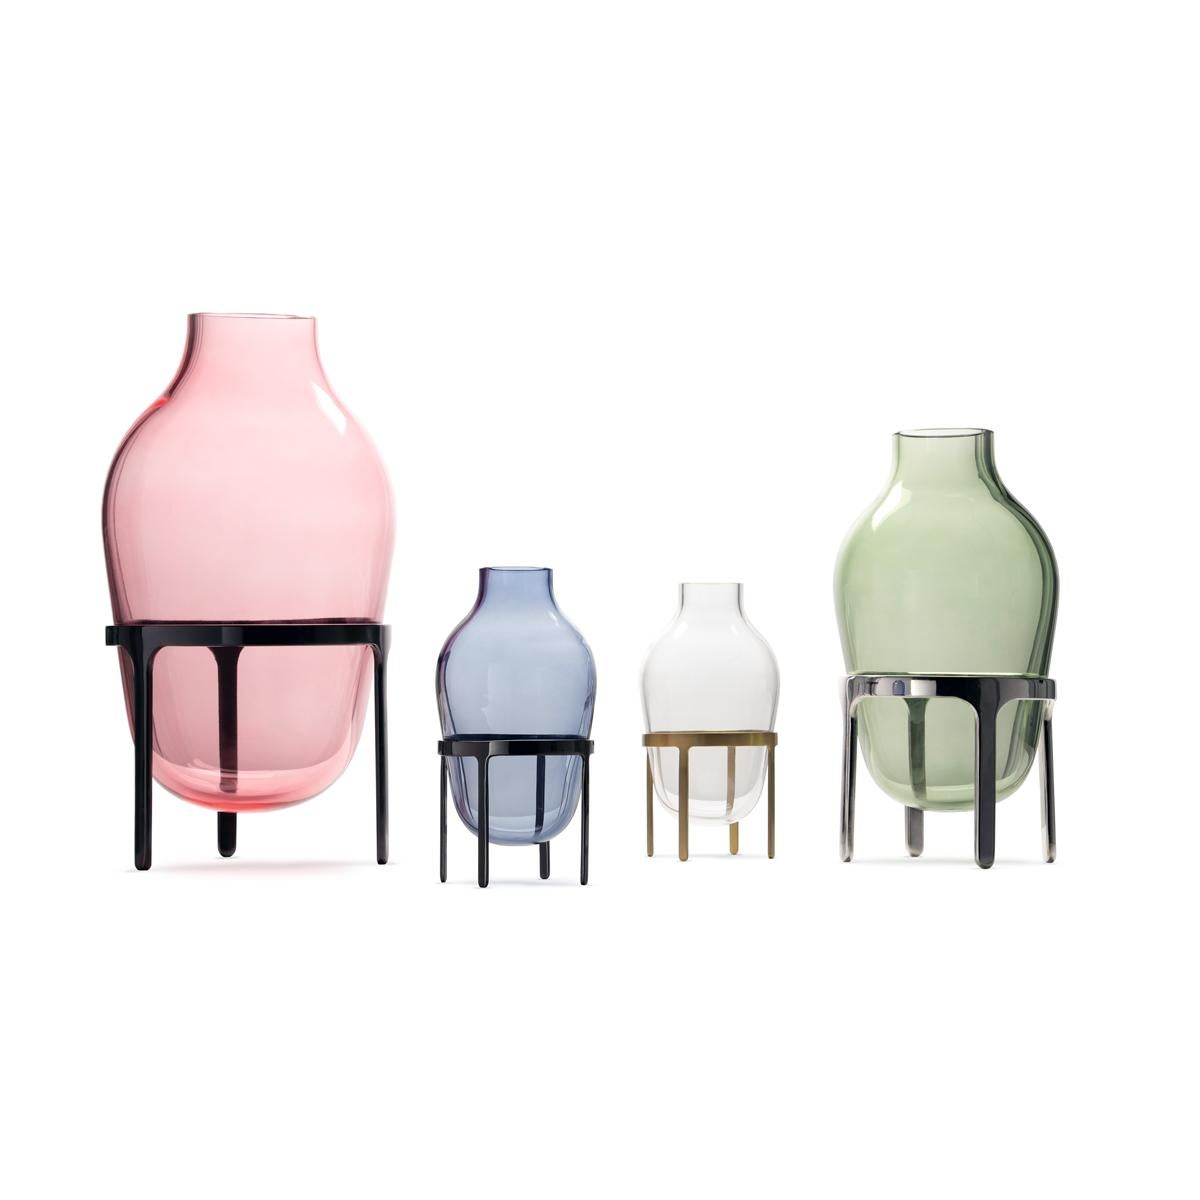 Titus I is a large pink blown grass vase with a gunmetal stand.
The product is part of the collection New Roman, by Jaime Hayon: inspired by the vessels of the Roman Empire, this collection transforms antique references into a celebration of